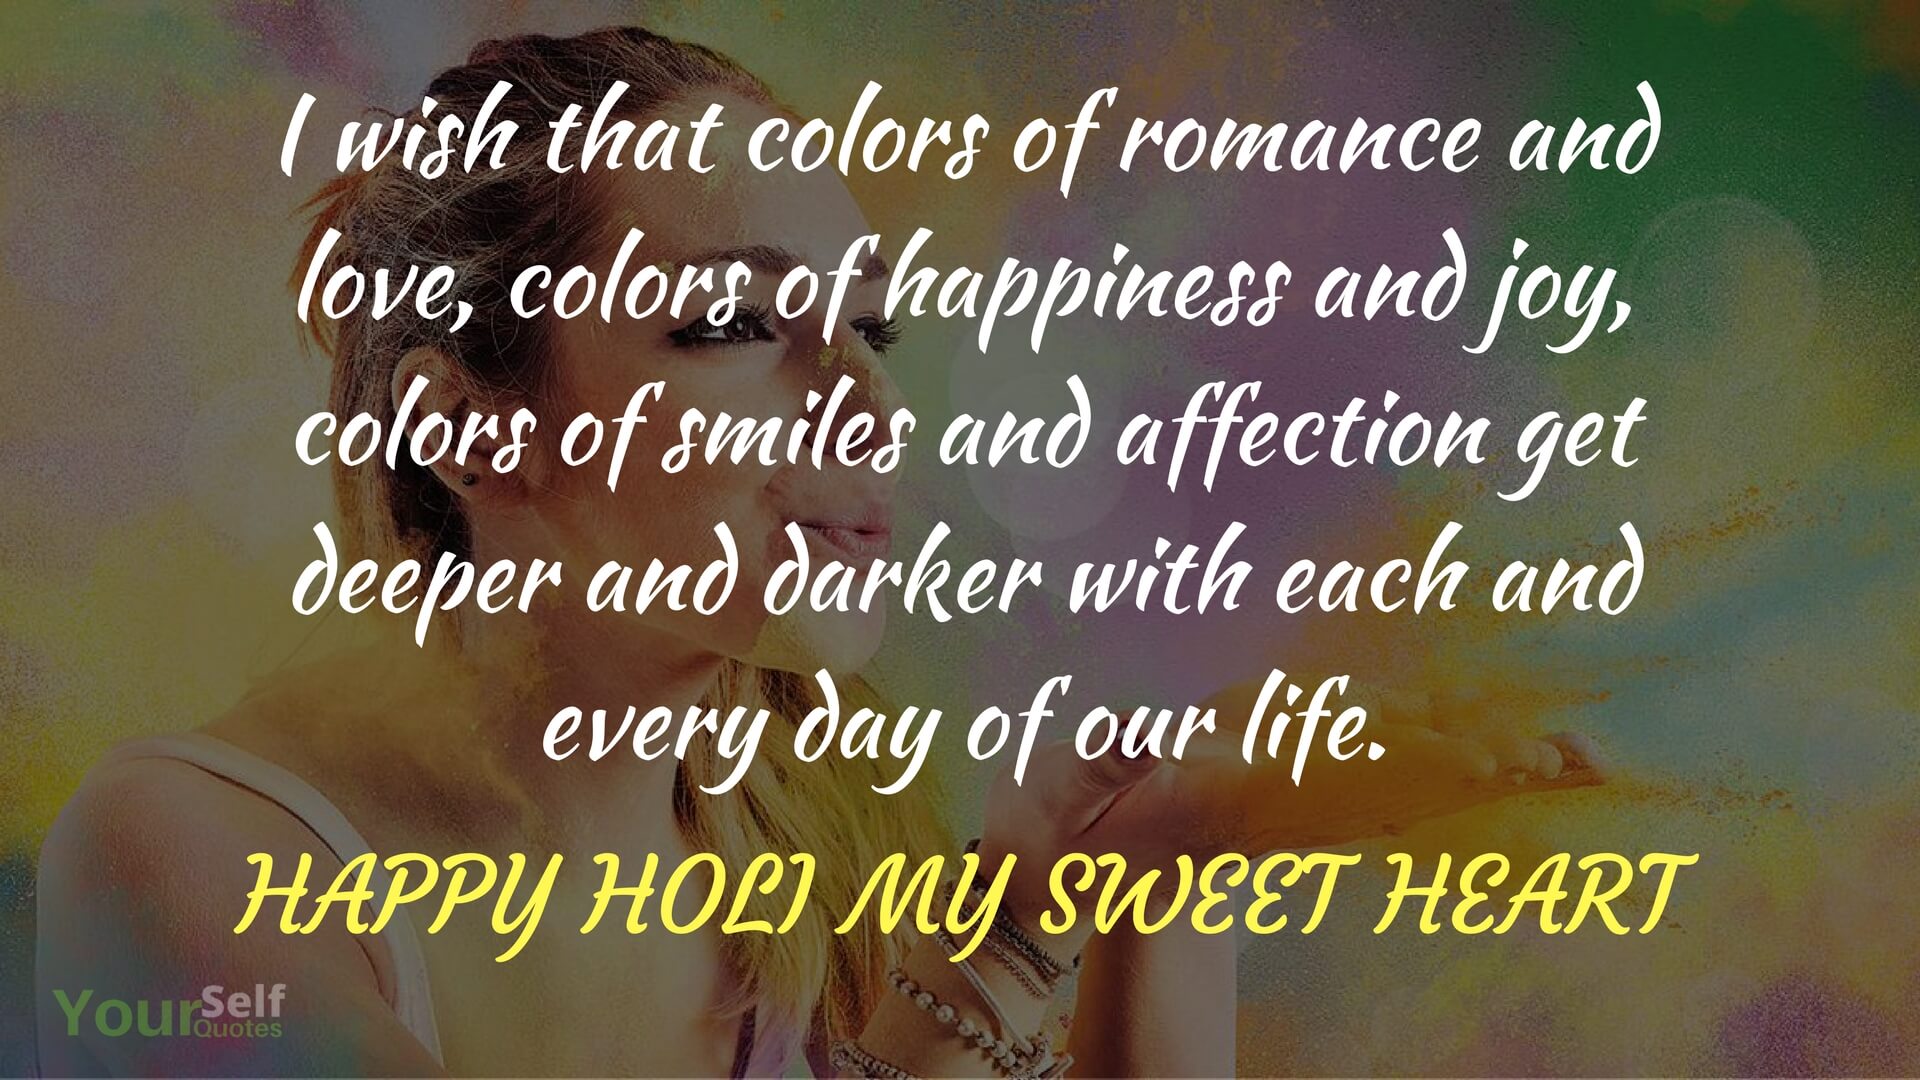 Wishing Holi Images Download - Romantic Lover Holi Wishes - HD Wallpaper 